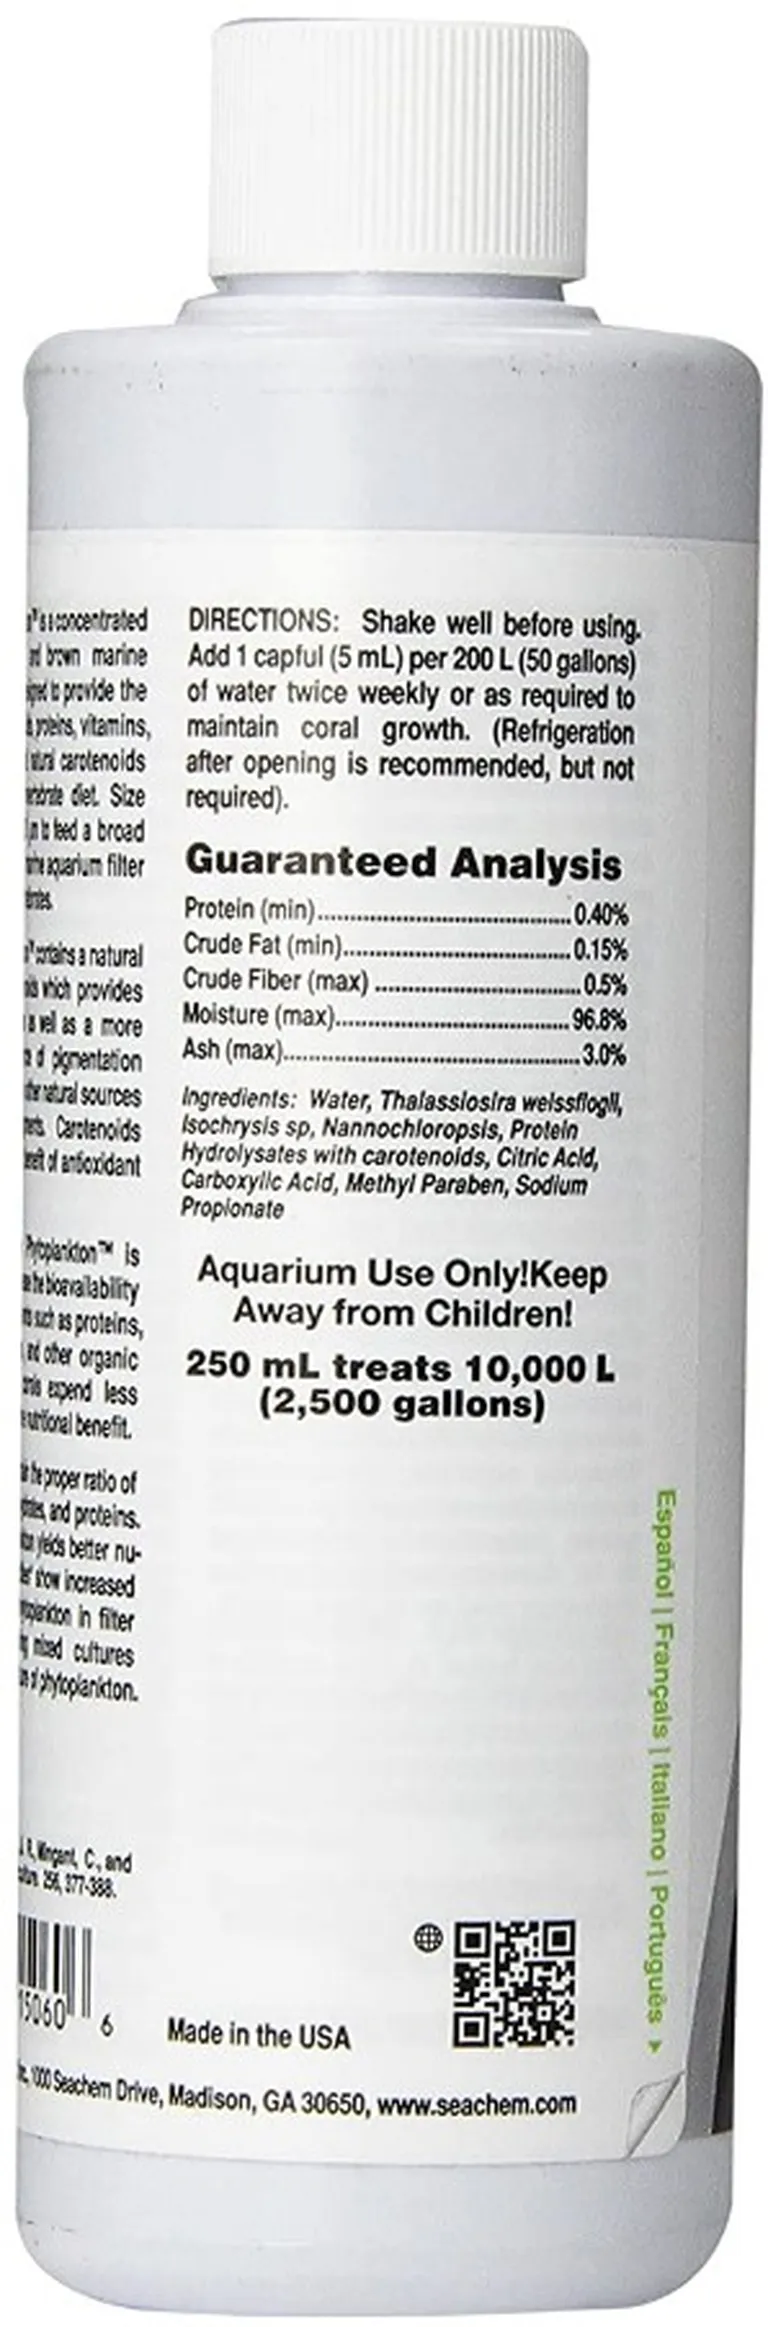 Seachem Reef Phytoplankton Unique Blend of Green and Brown Phytoplankton for Aquariums Photo 2